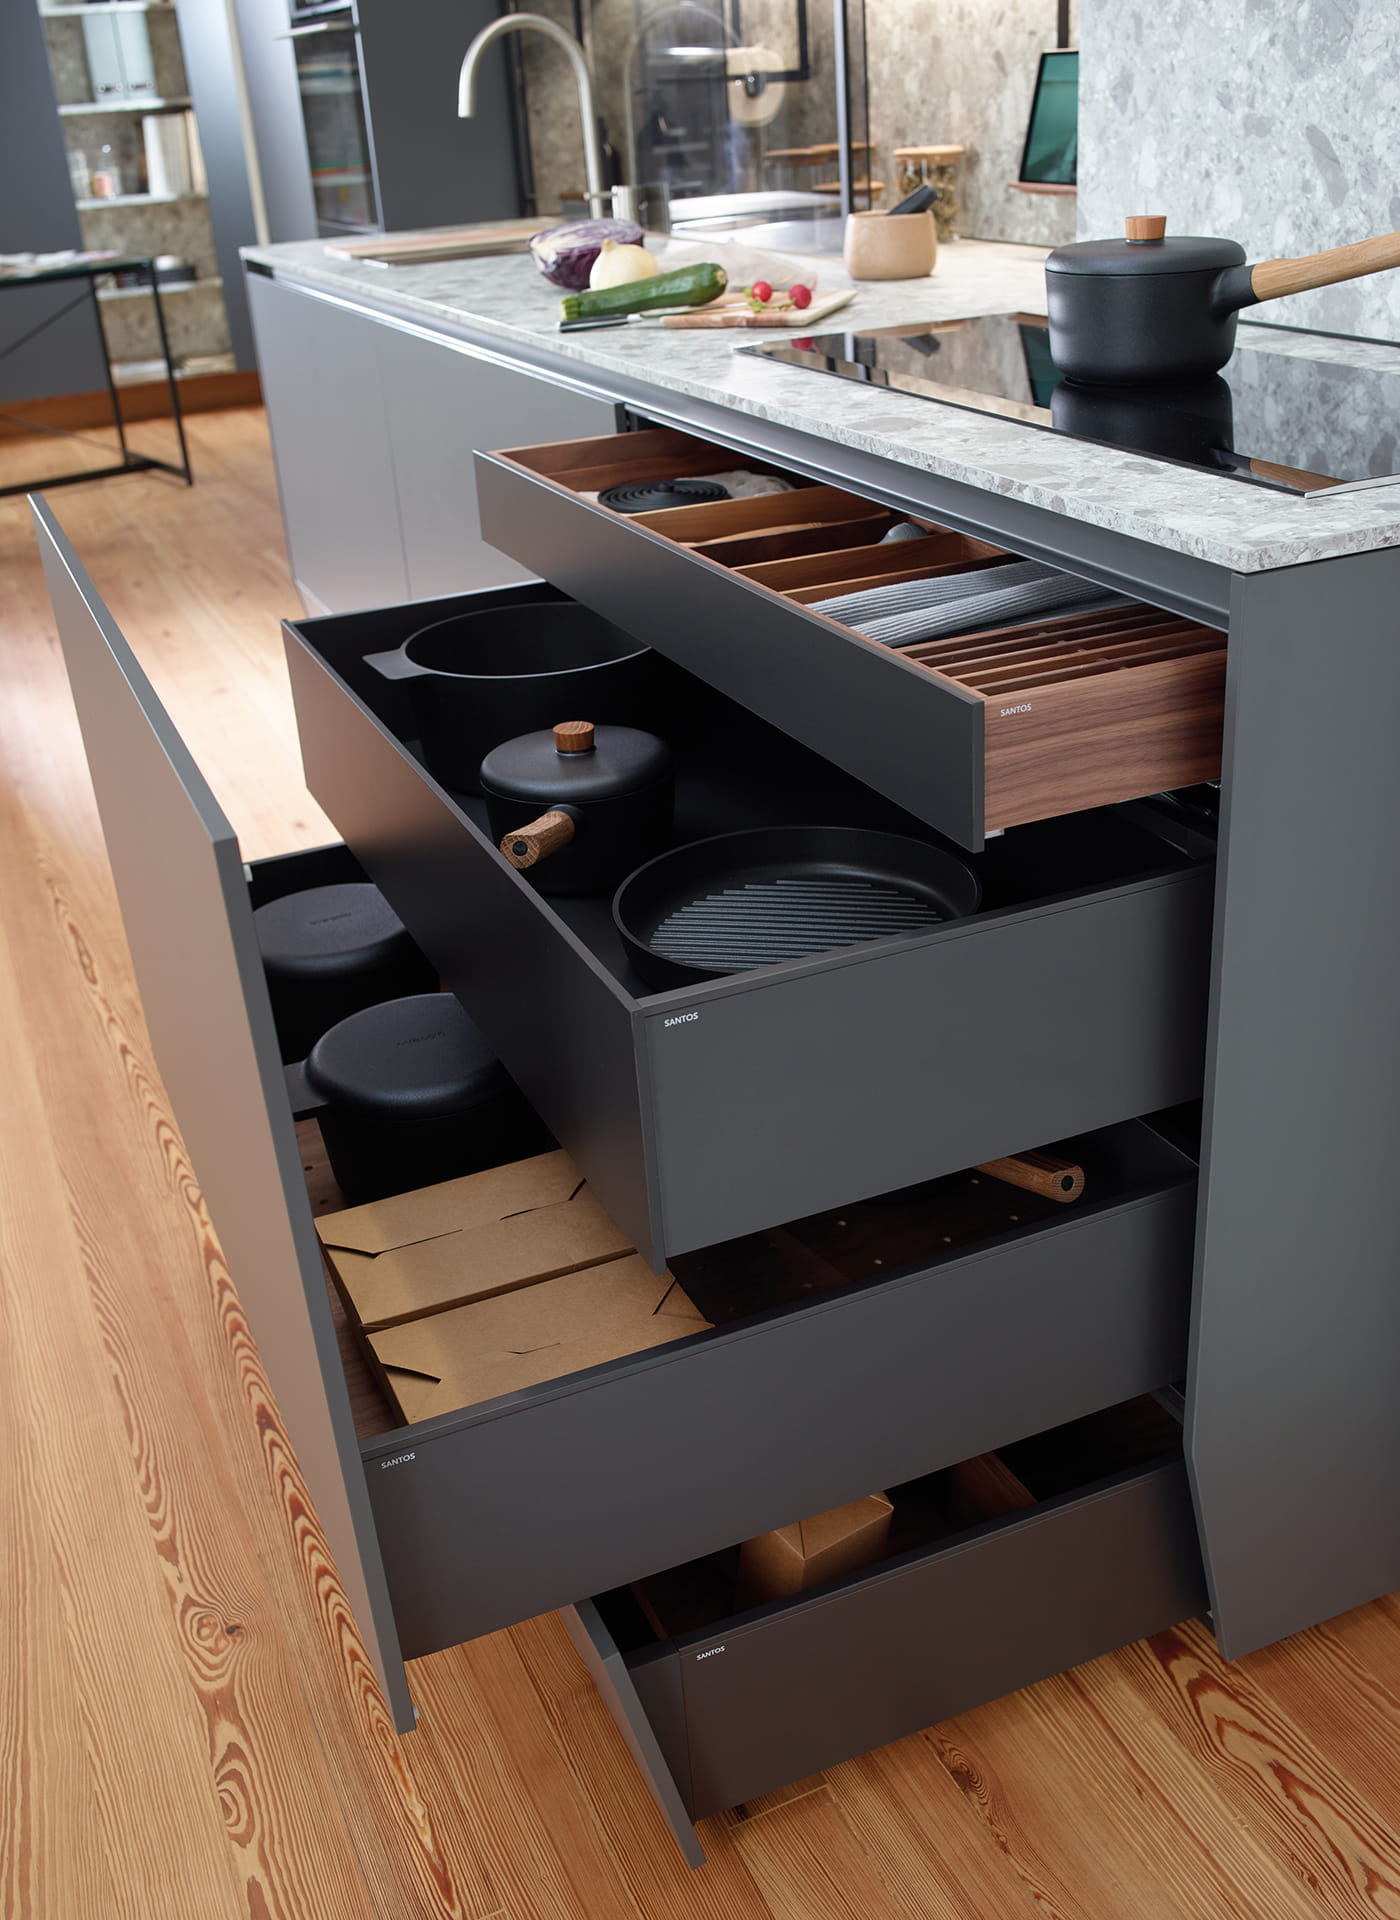 Santos kitchen furniture: base units, essentials for working, organising and storing